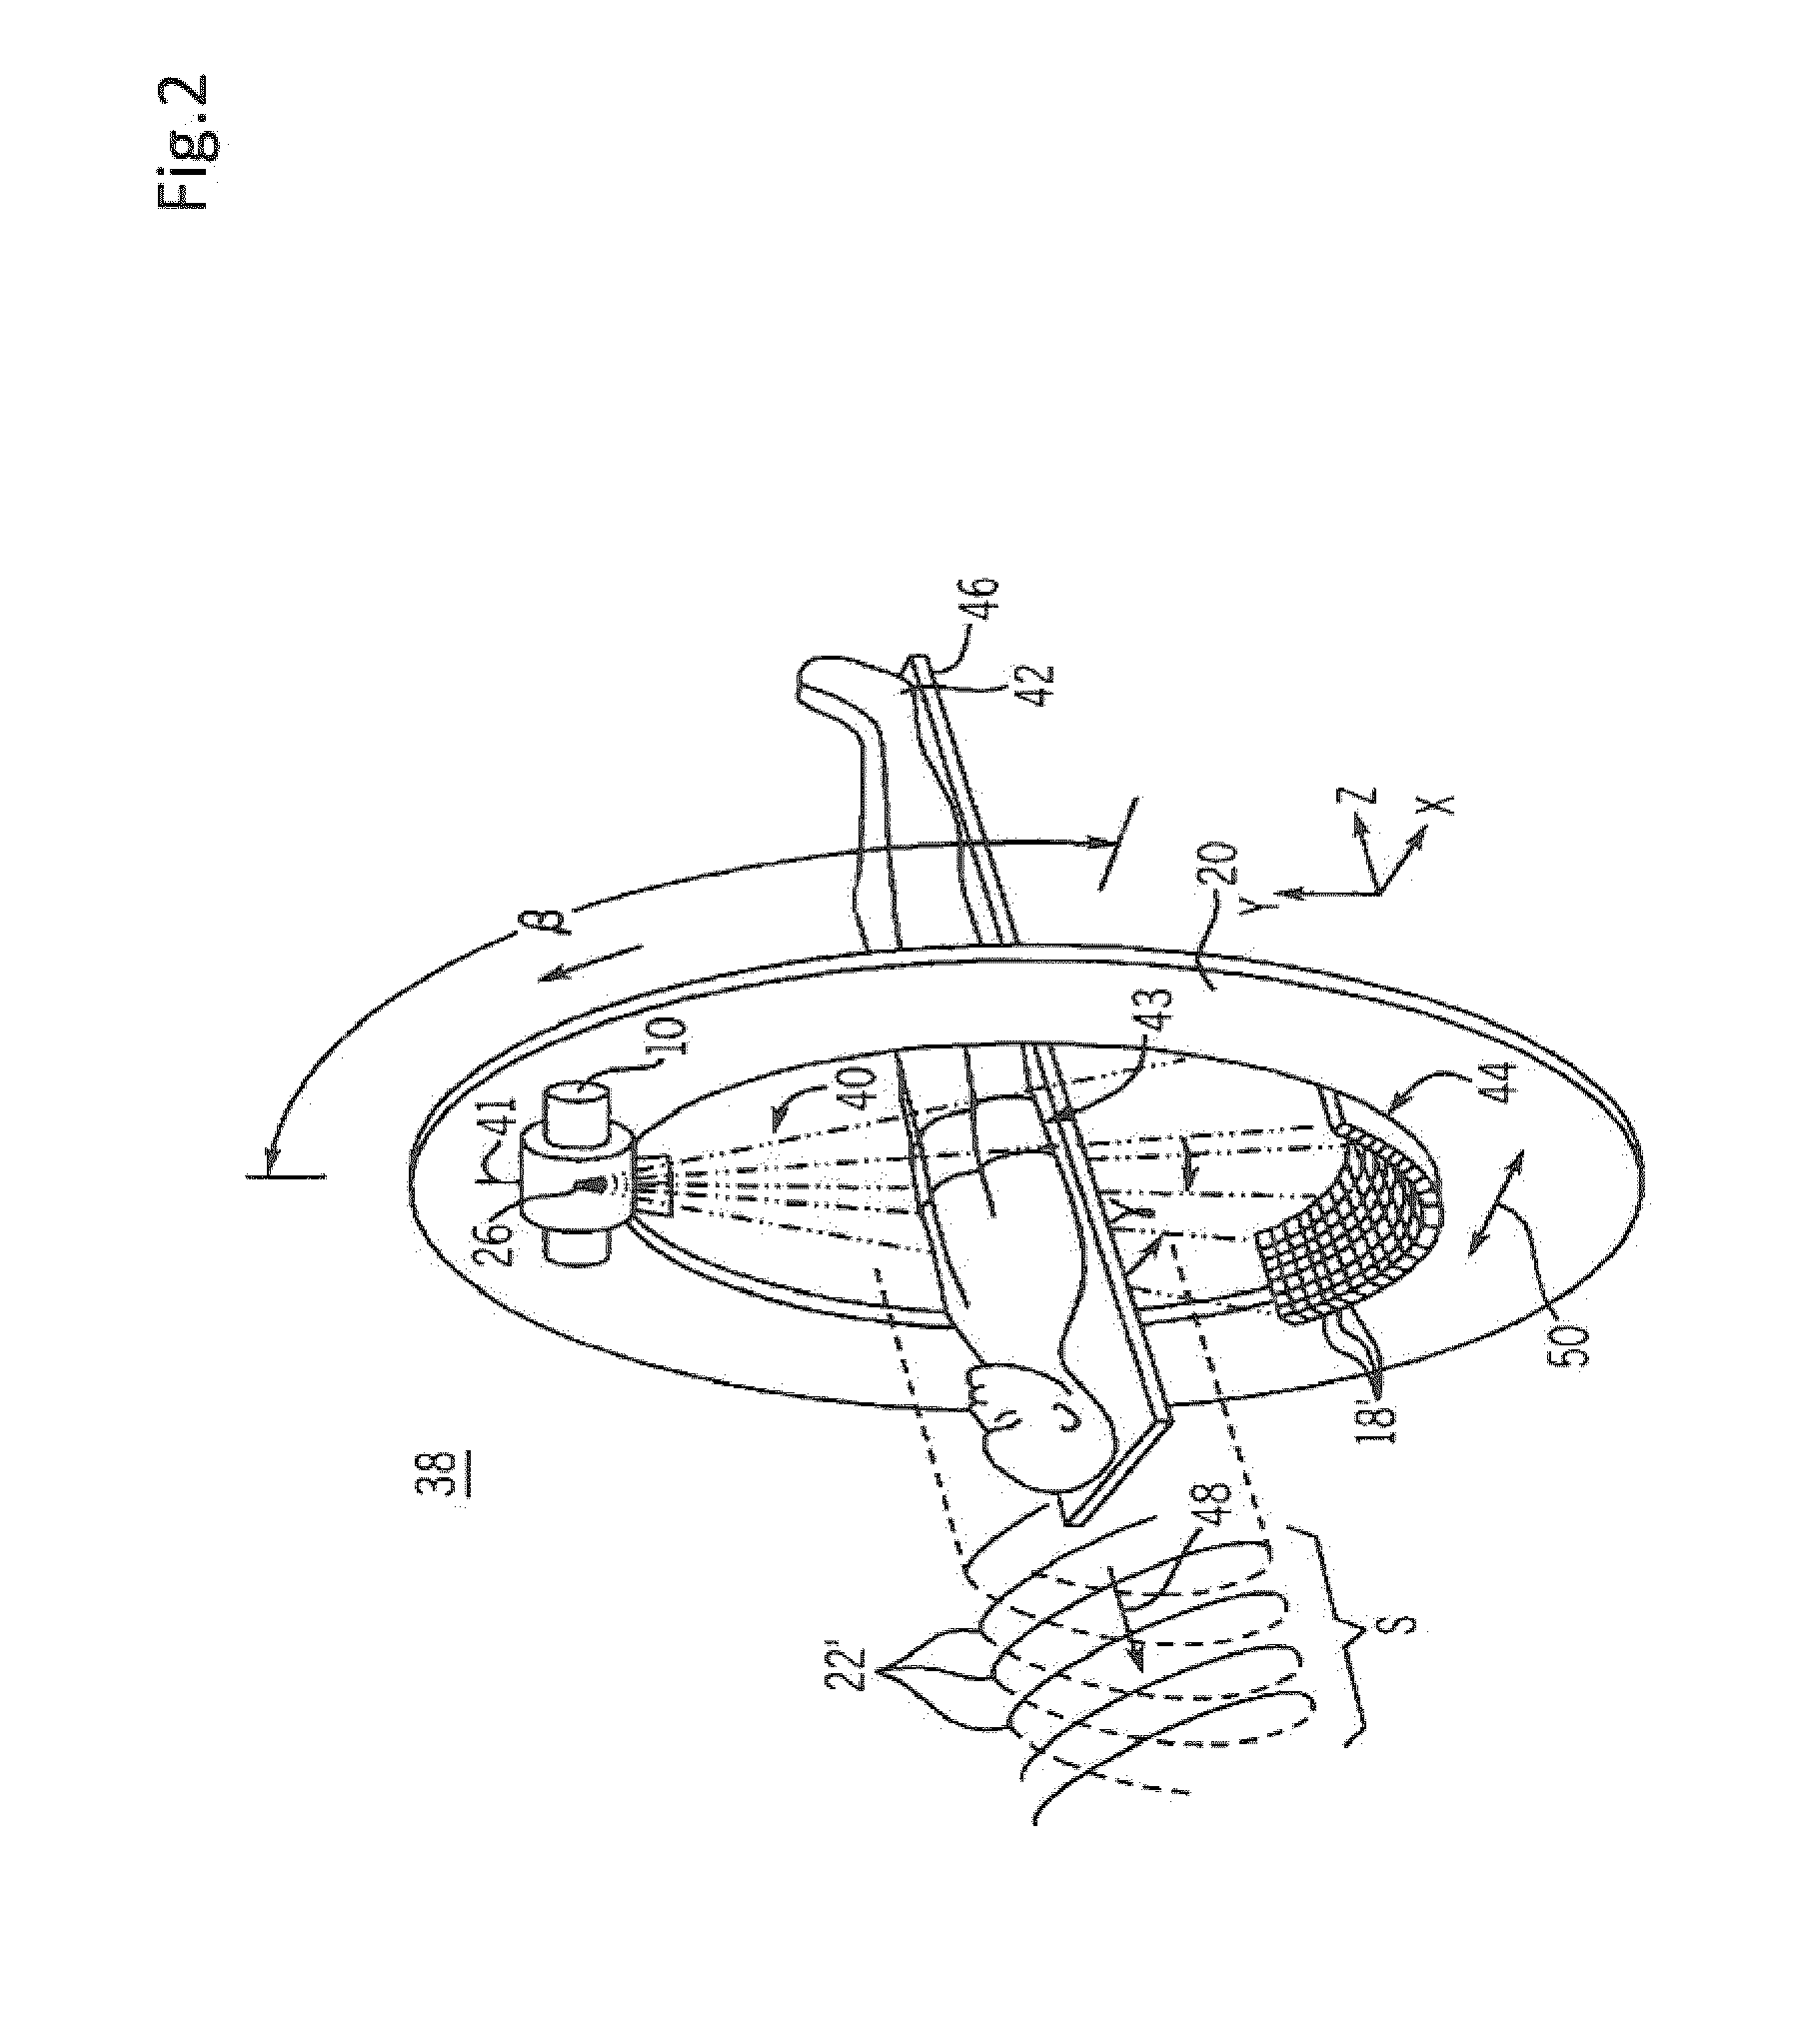 System and method for filtration reduced equalized exposure computed tomography